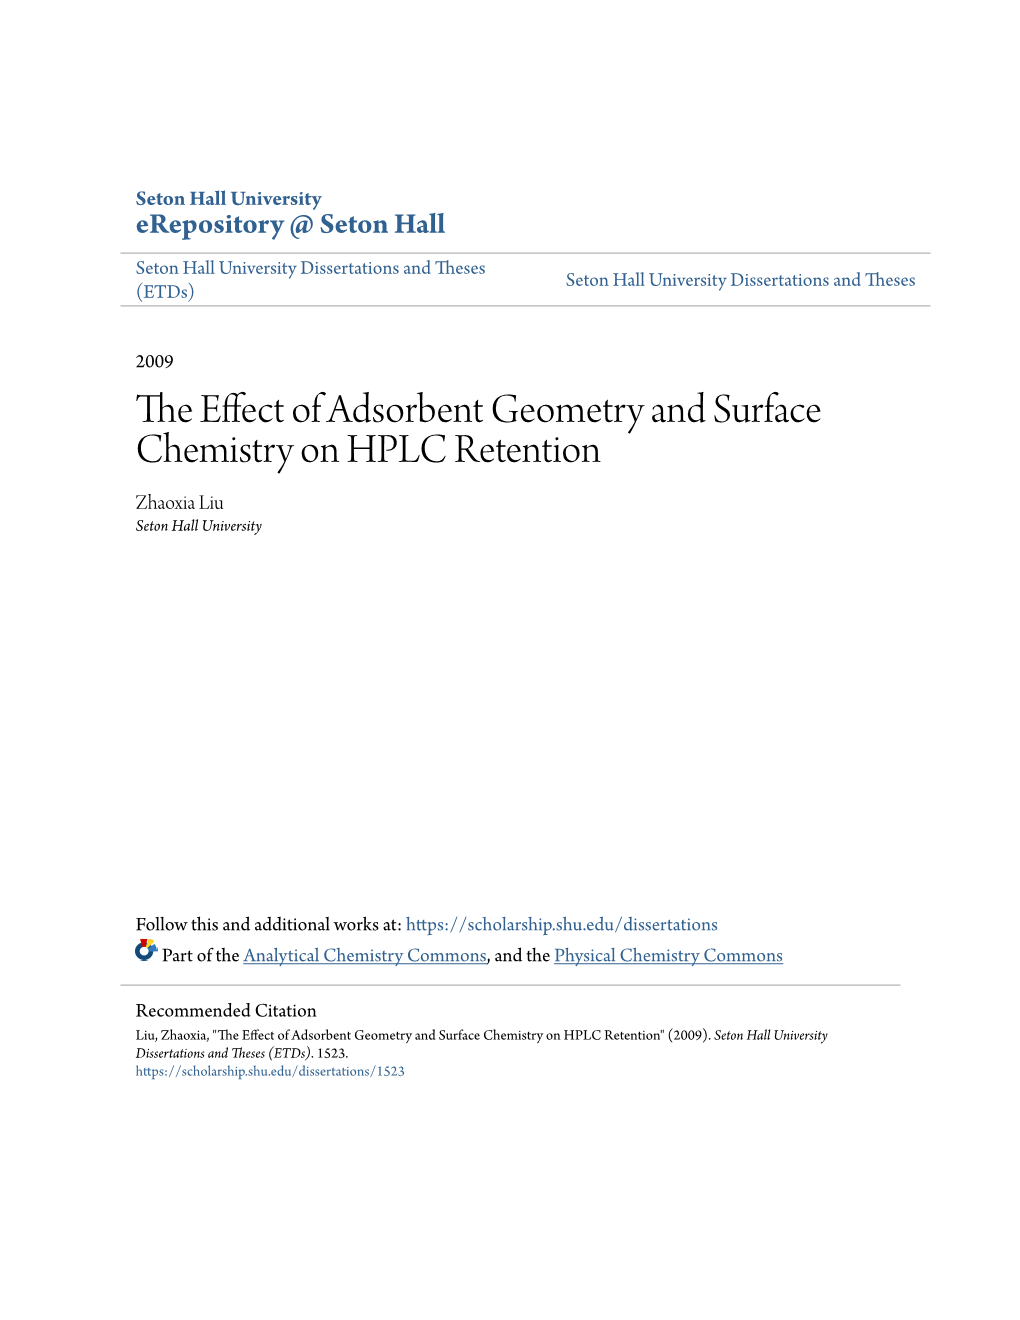 The Effect of Adsorbent Geometry and Surface Chemistry on HPLC Retention" (2009)